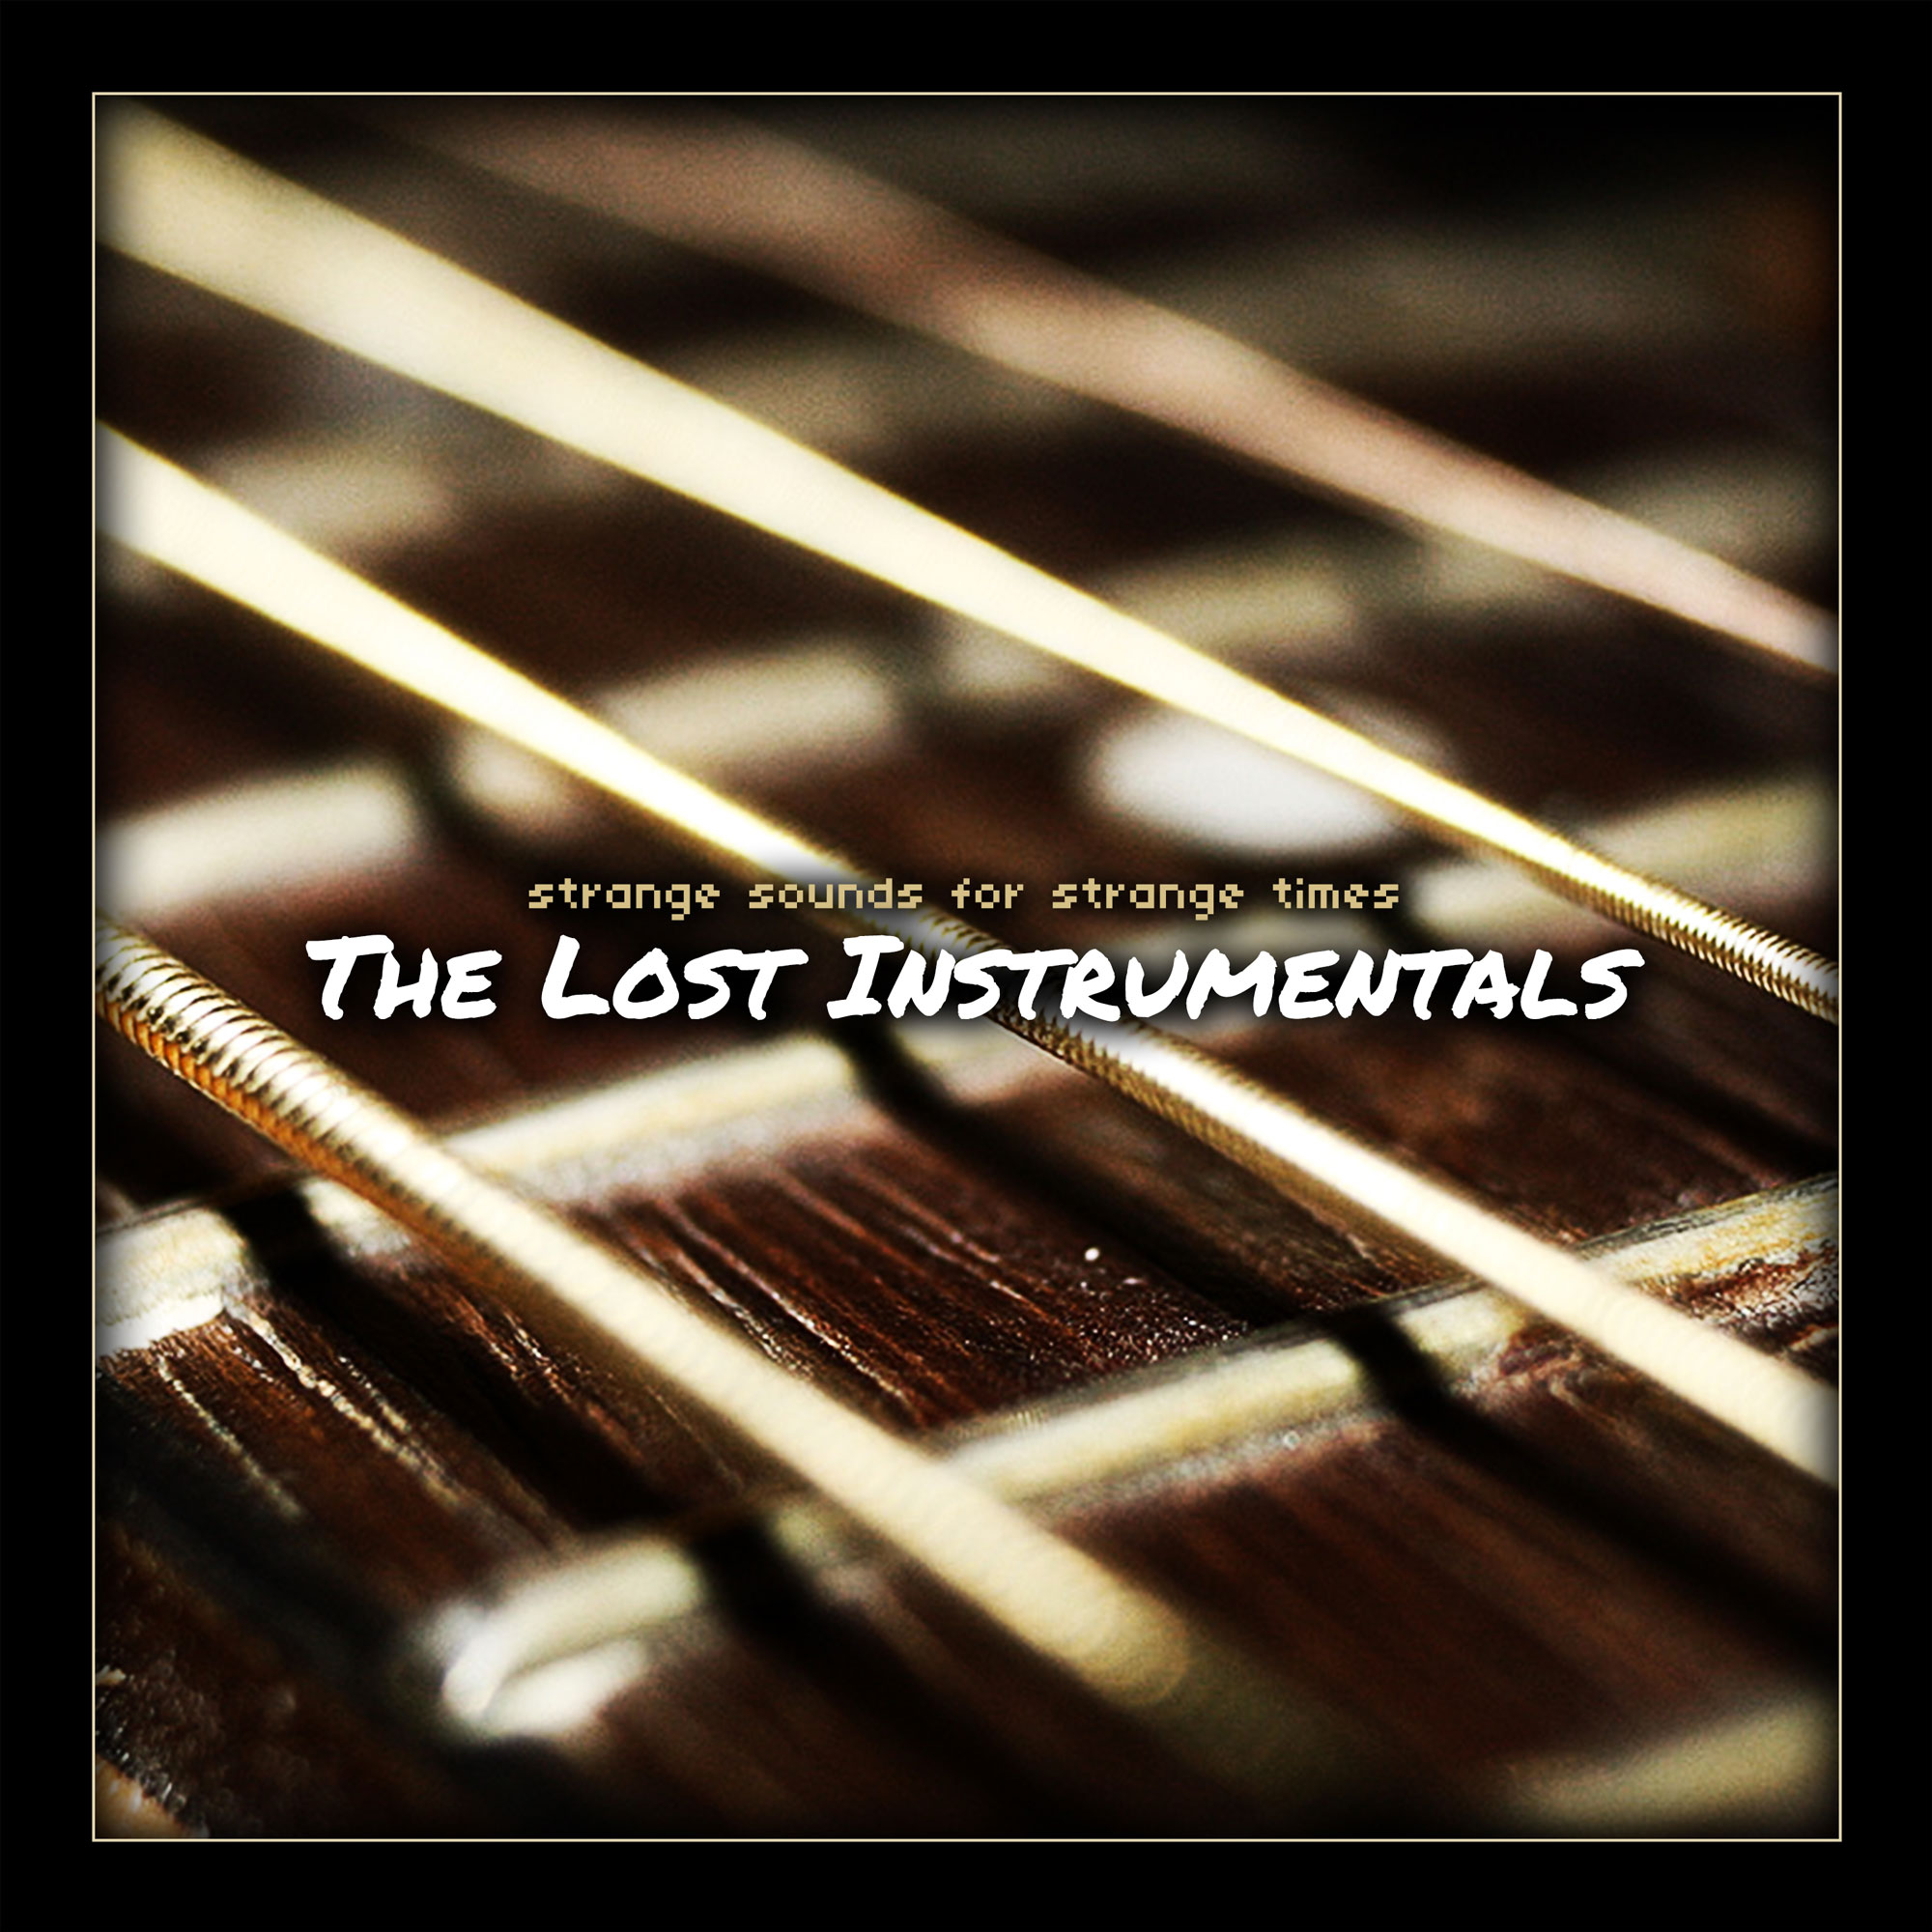 The Lost Instrumentals - Album Art - Strange Sounds for Strange Times - Anthony Carrozzo music